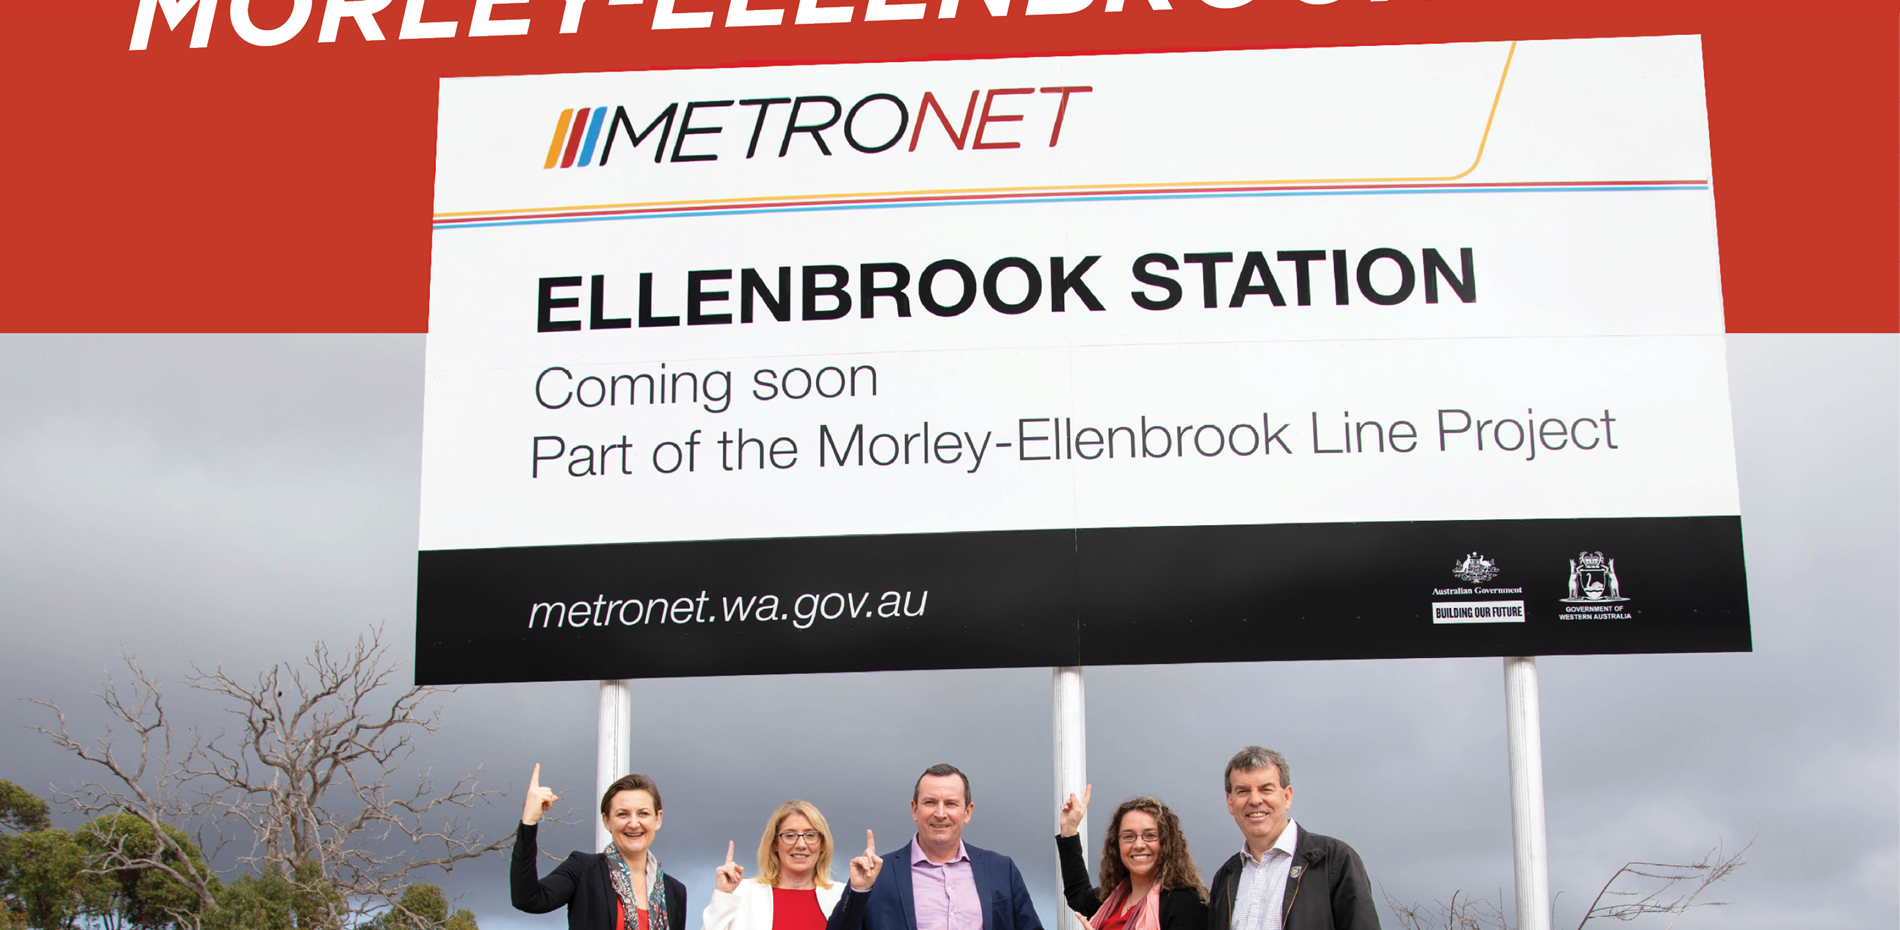 Community excited about METRONET coming to Ellenbrook   Main Image